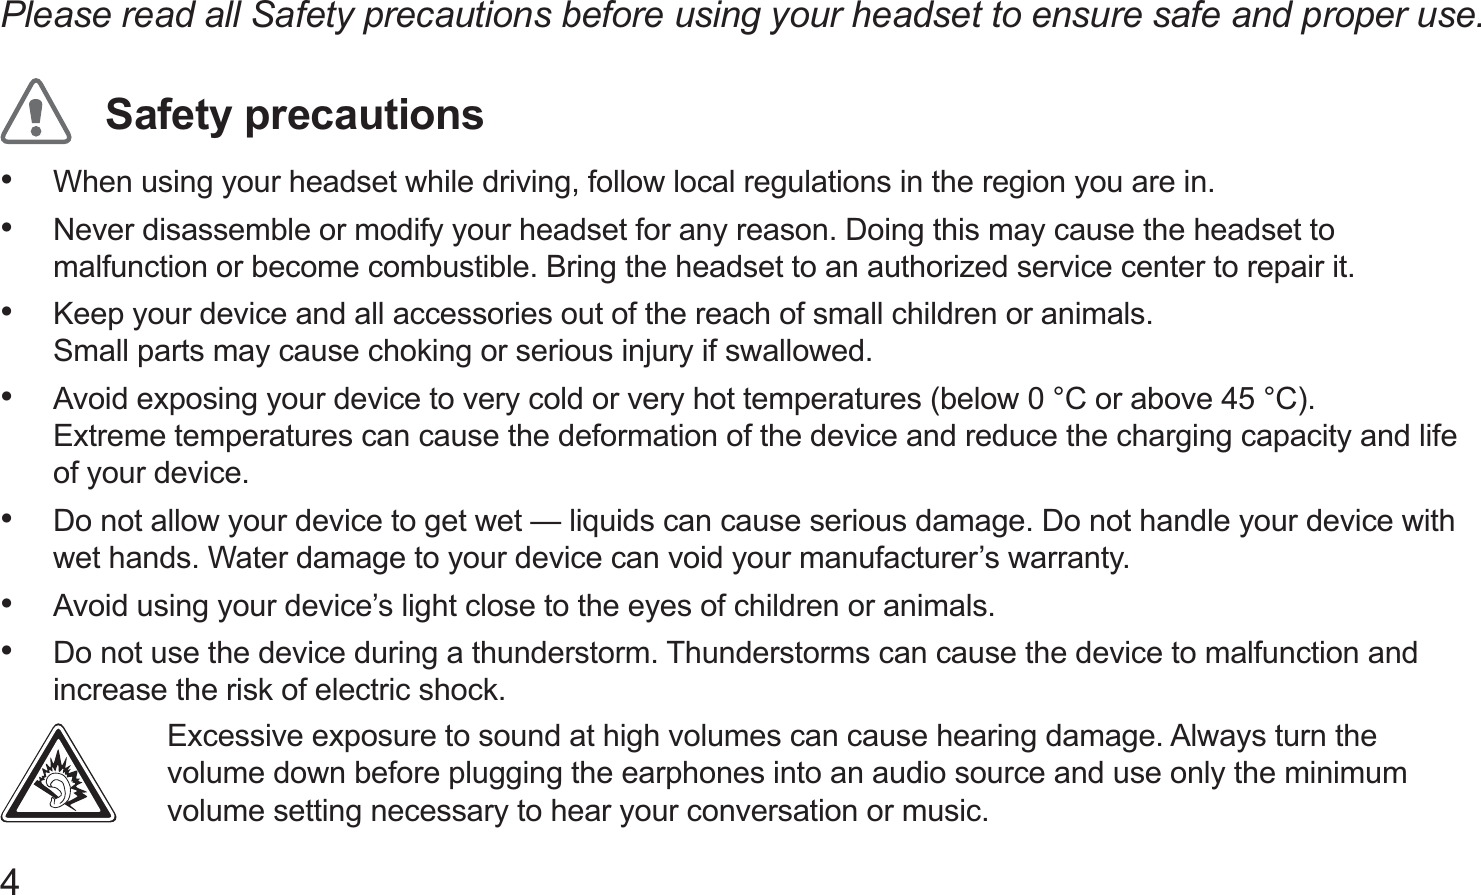 4Please read all Safety precautions before using your headset to ensure safe and proper use.Safety precautionsWhen using your headset while driving, follow local regulations in the region you are in.• Never disassemble or modify your headset for any reason. Doing this may cause the headset to • malfunction or become combustible. Bring the headset to an authorized service center to repair it.Keep your device and all accessories out of the reach of small children or animals.  • Small parts may cause choking or serious injury if swallowed.Avoid exposing your device to very cold or very hot temperatures (below 0 °C or above 45 °C).  • Extreme temperatures can cause the deformation of the device and reduce the charging capacity and life of your device.Do not allow your device to get wet — liquids can cause serious damage. Do not handle your device with • wet hands. Water damage to your device can void your manufacturer’s warranty.Avoid using your device’s light close to the eyes of children or animals.• Do not use the device during a thunderstorm. Thunderstorms can cause the device to malfunction and • increase the risk of electric shock. Excessive exposure to sound at high volumes can cause hearing damage. Always turn the volume down before plugging the earphones into an audio source and use only the minimum volume setting necessary to hear your conversation or music.